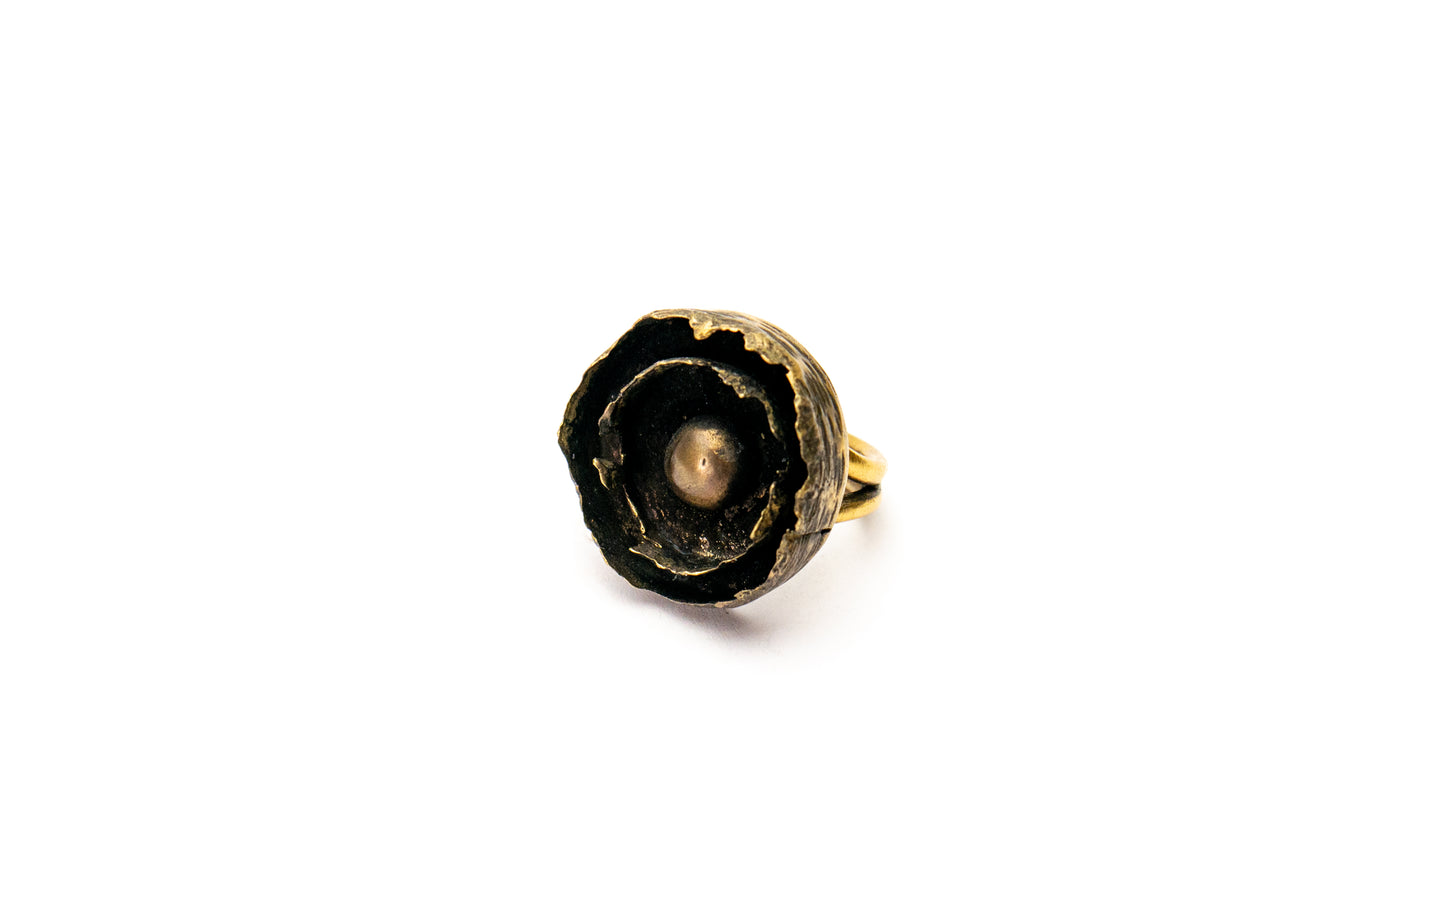 Concentric circles brass ring - OOAK Statement Ring